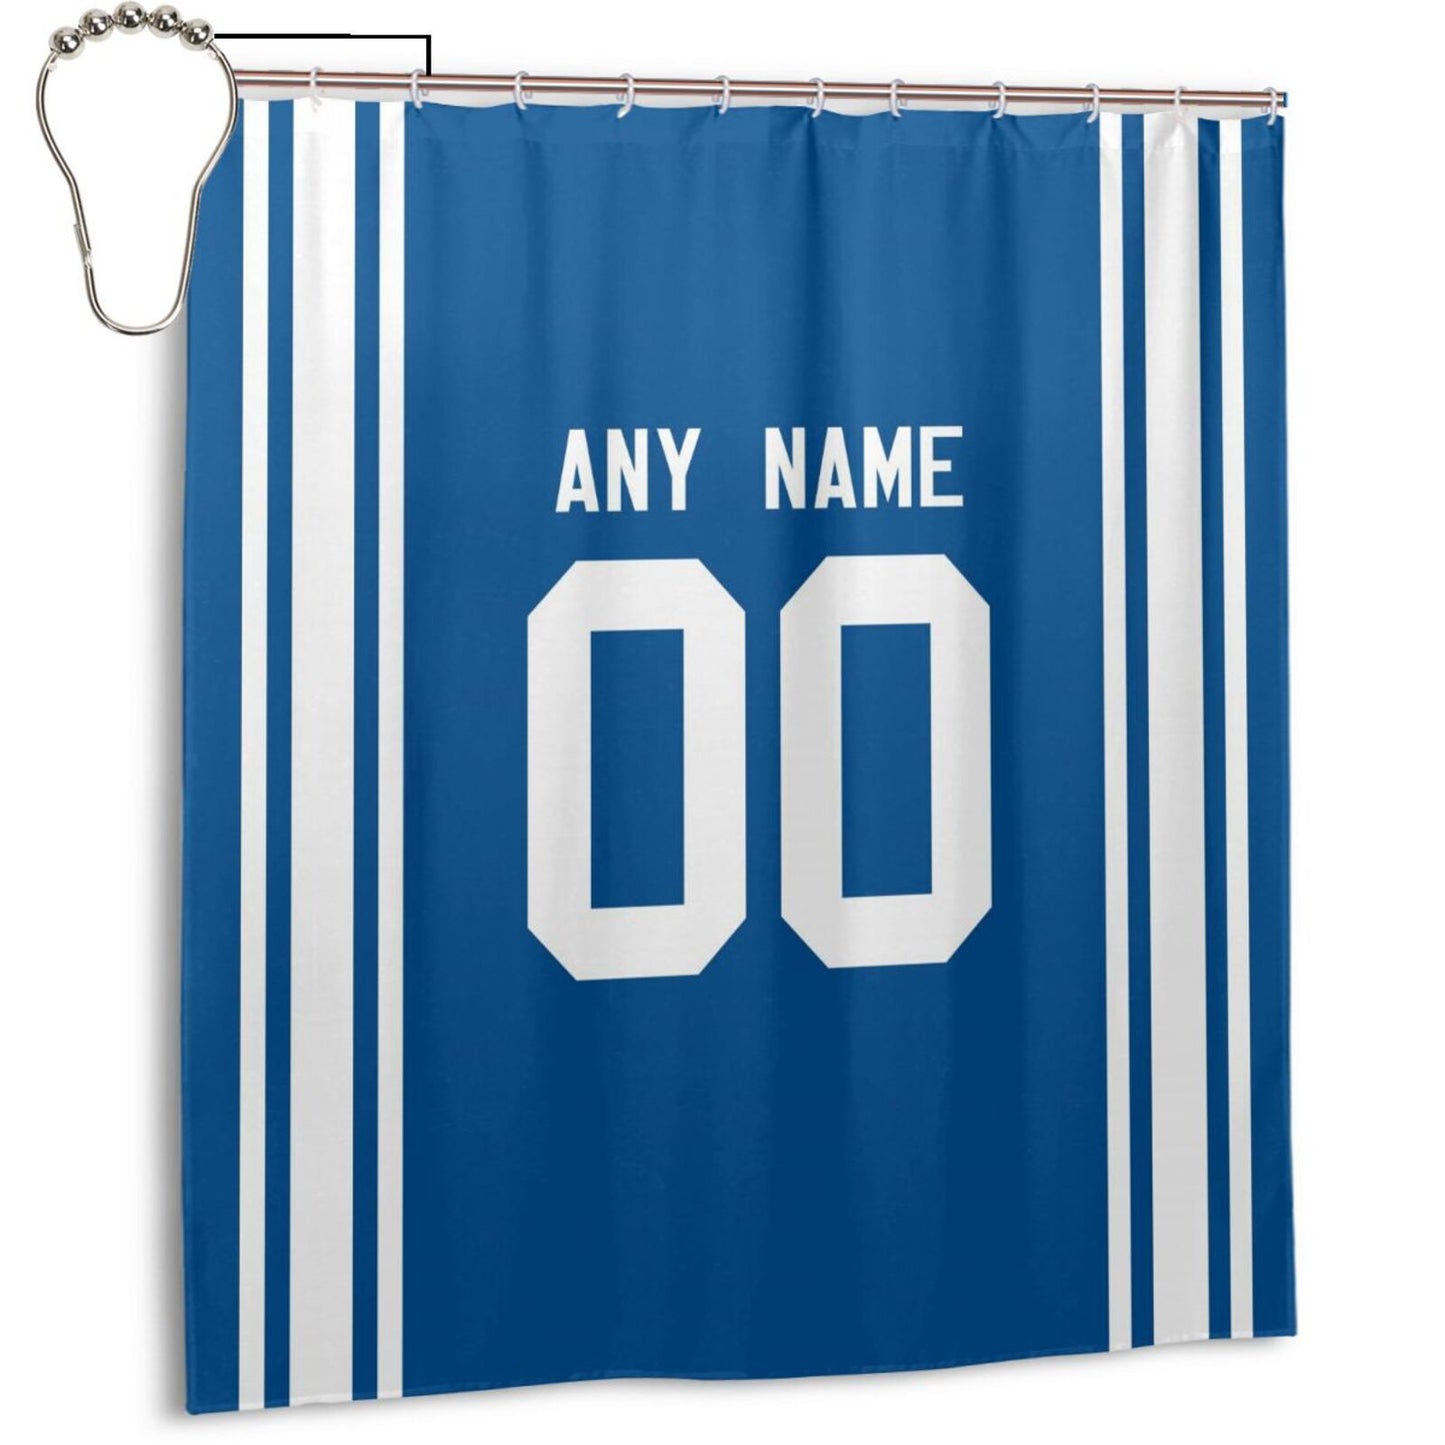 Custom Football New York Giants style personalized shower curtain custom design name and number set of 12 shower curtain hooks Rings